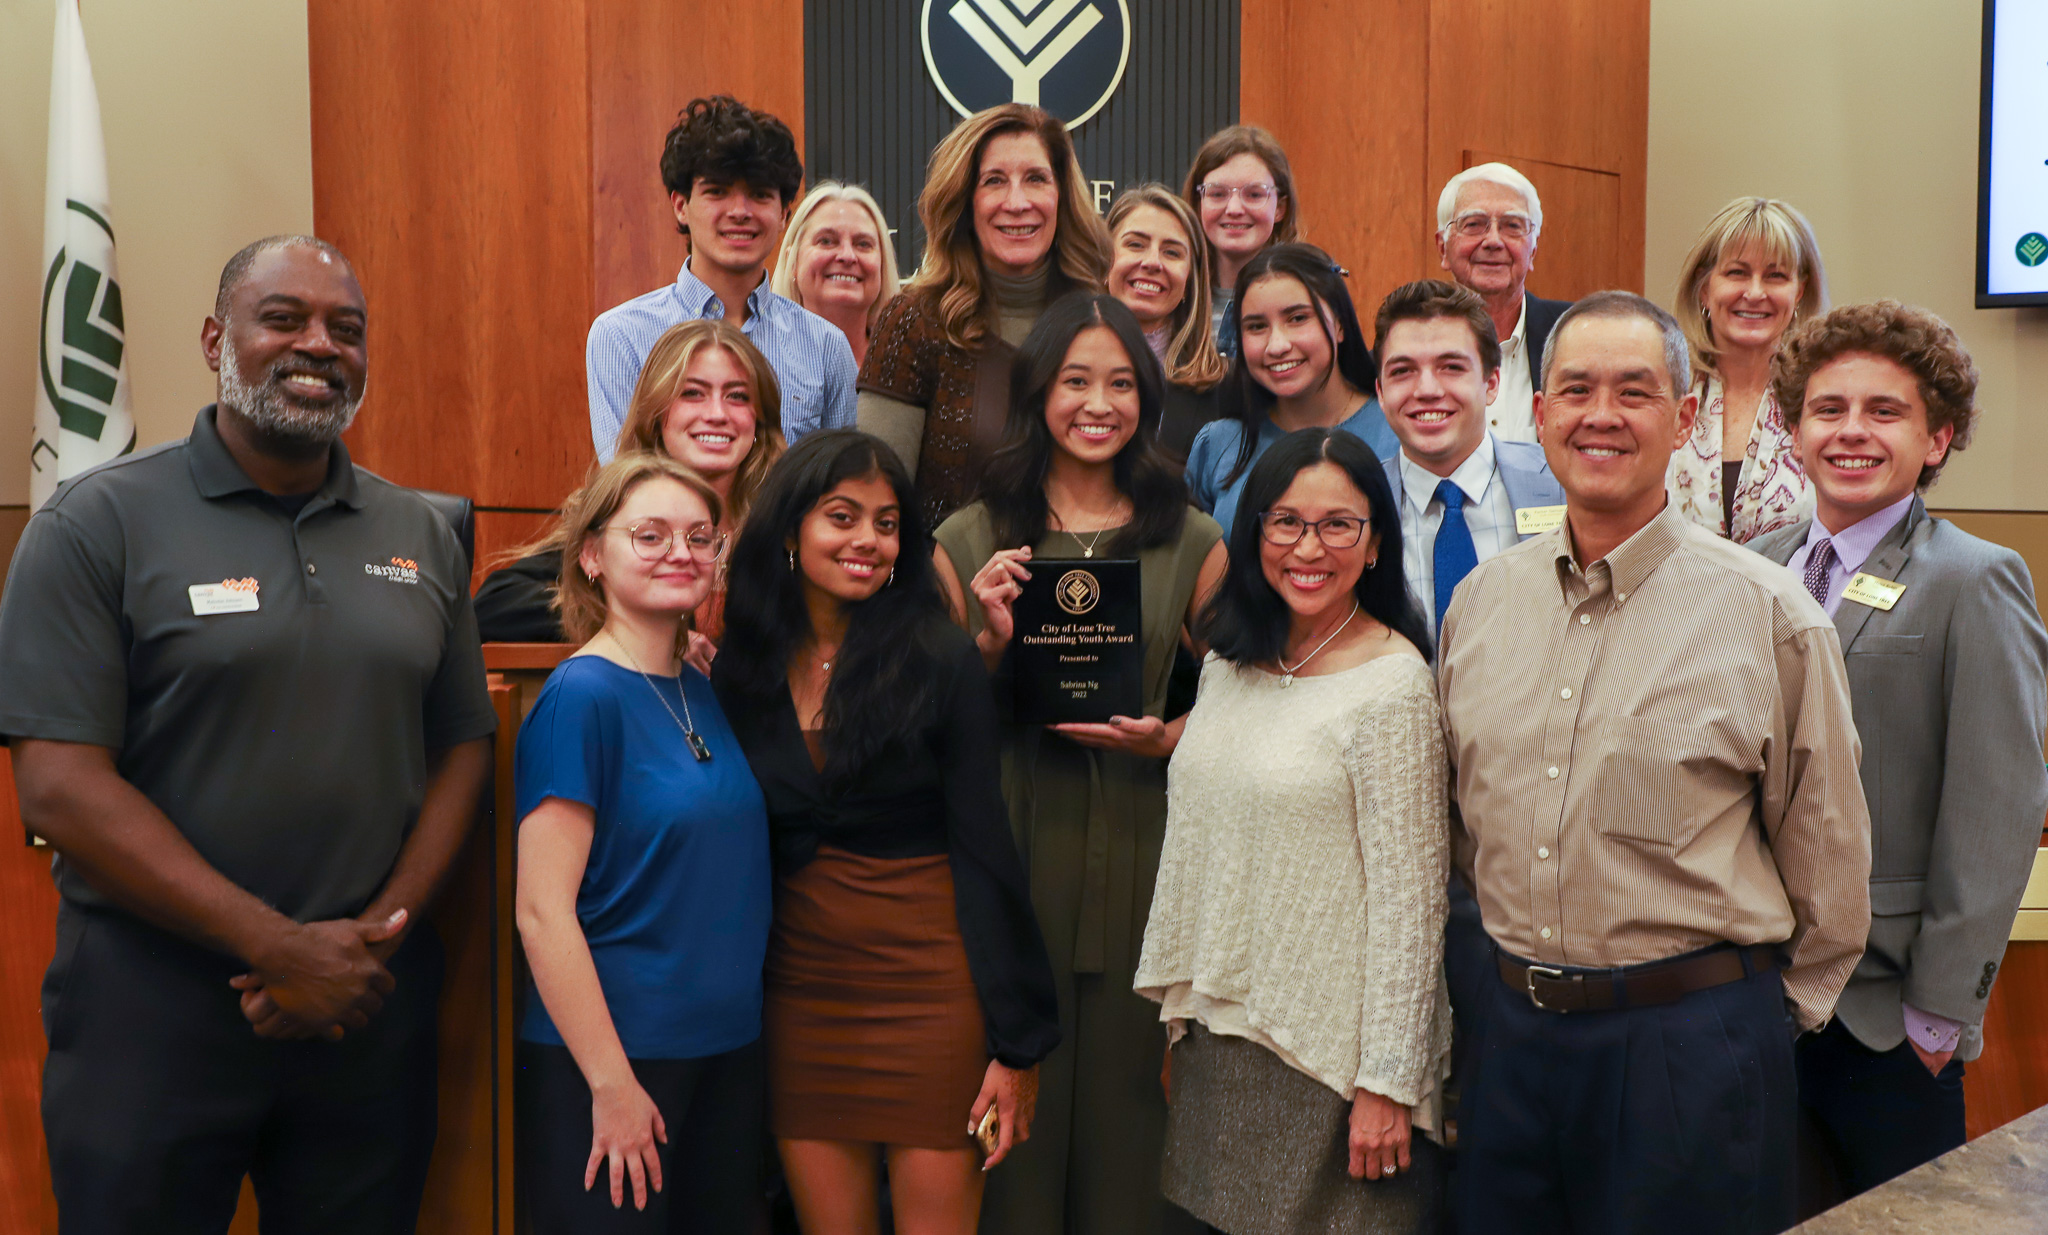 Highlands Ranch High School student Sabrina Ng is awarded the 2022 Outstanding Youth of Lone Tree Award and poses with Lone Tree City Council and Youth Commission.